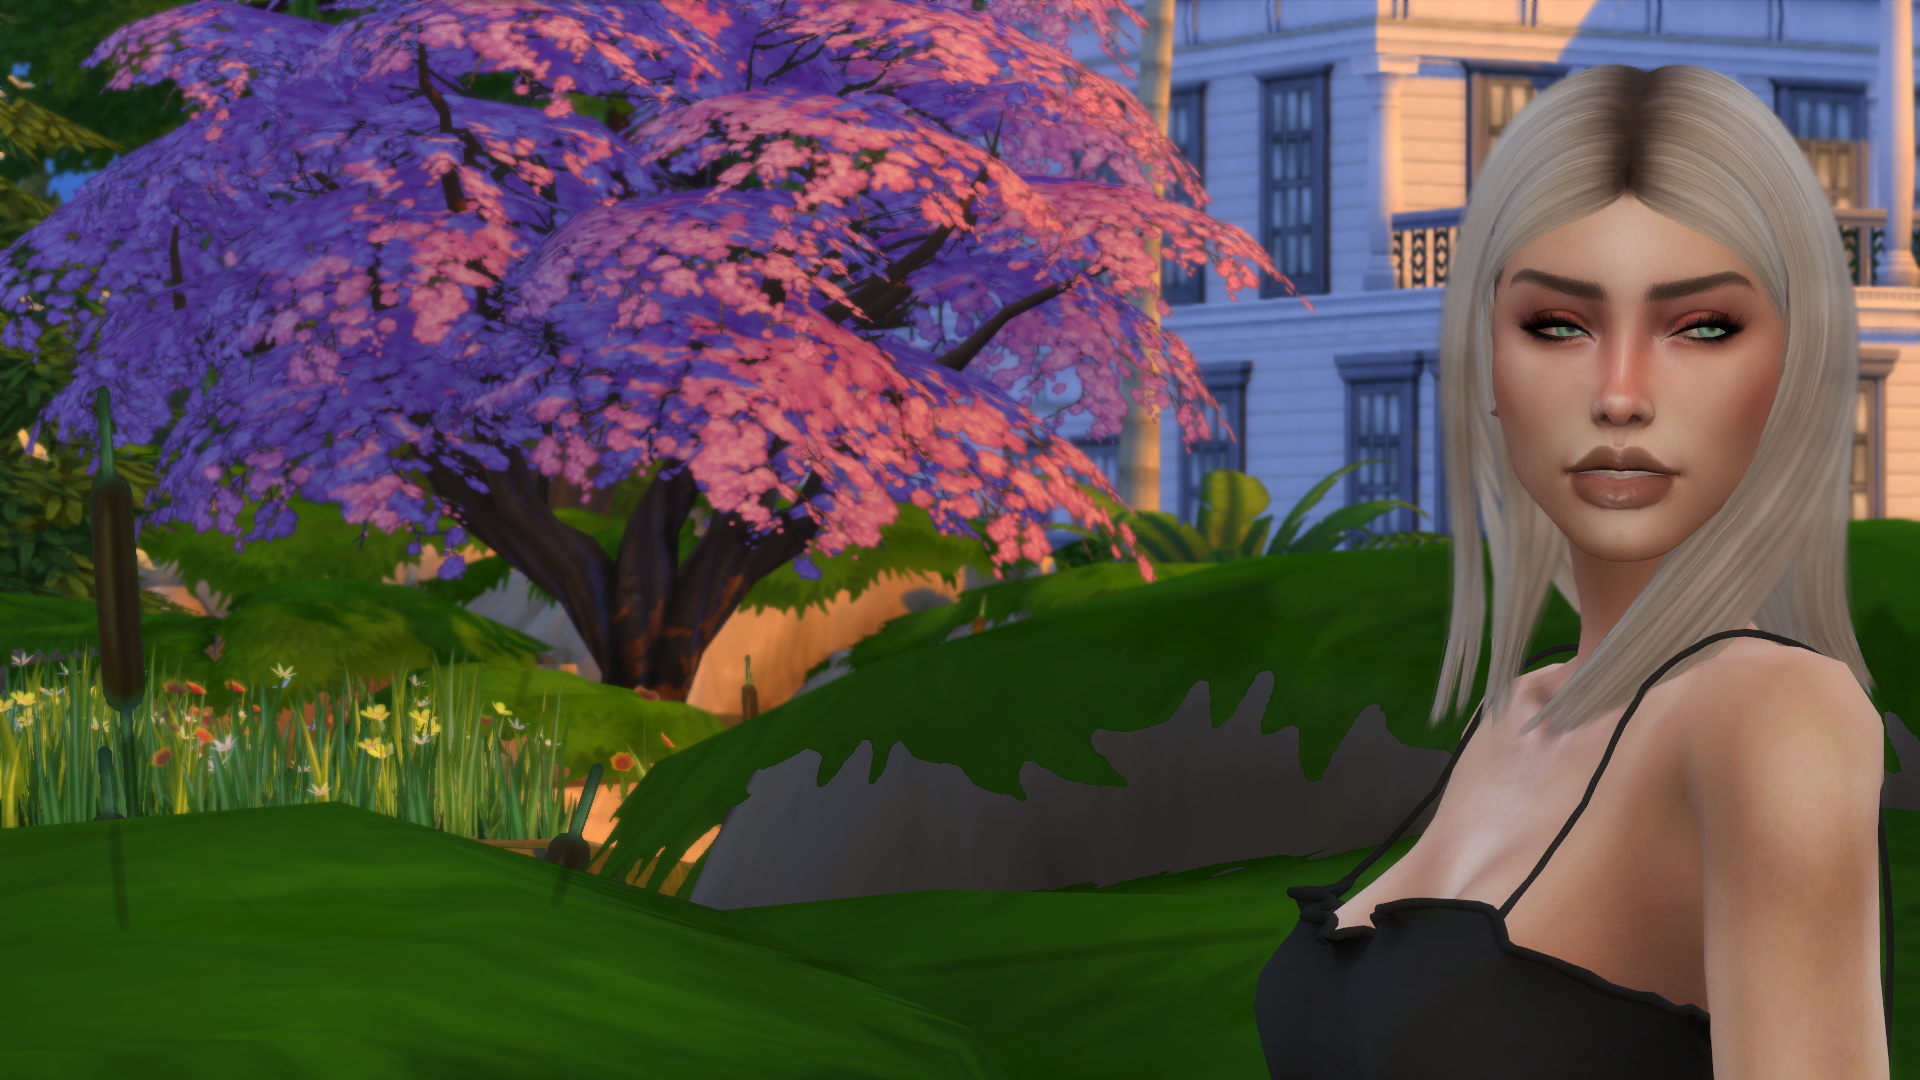 Share Your Female Sims! - Page 70 - The Sims 4 General Discussion ...